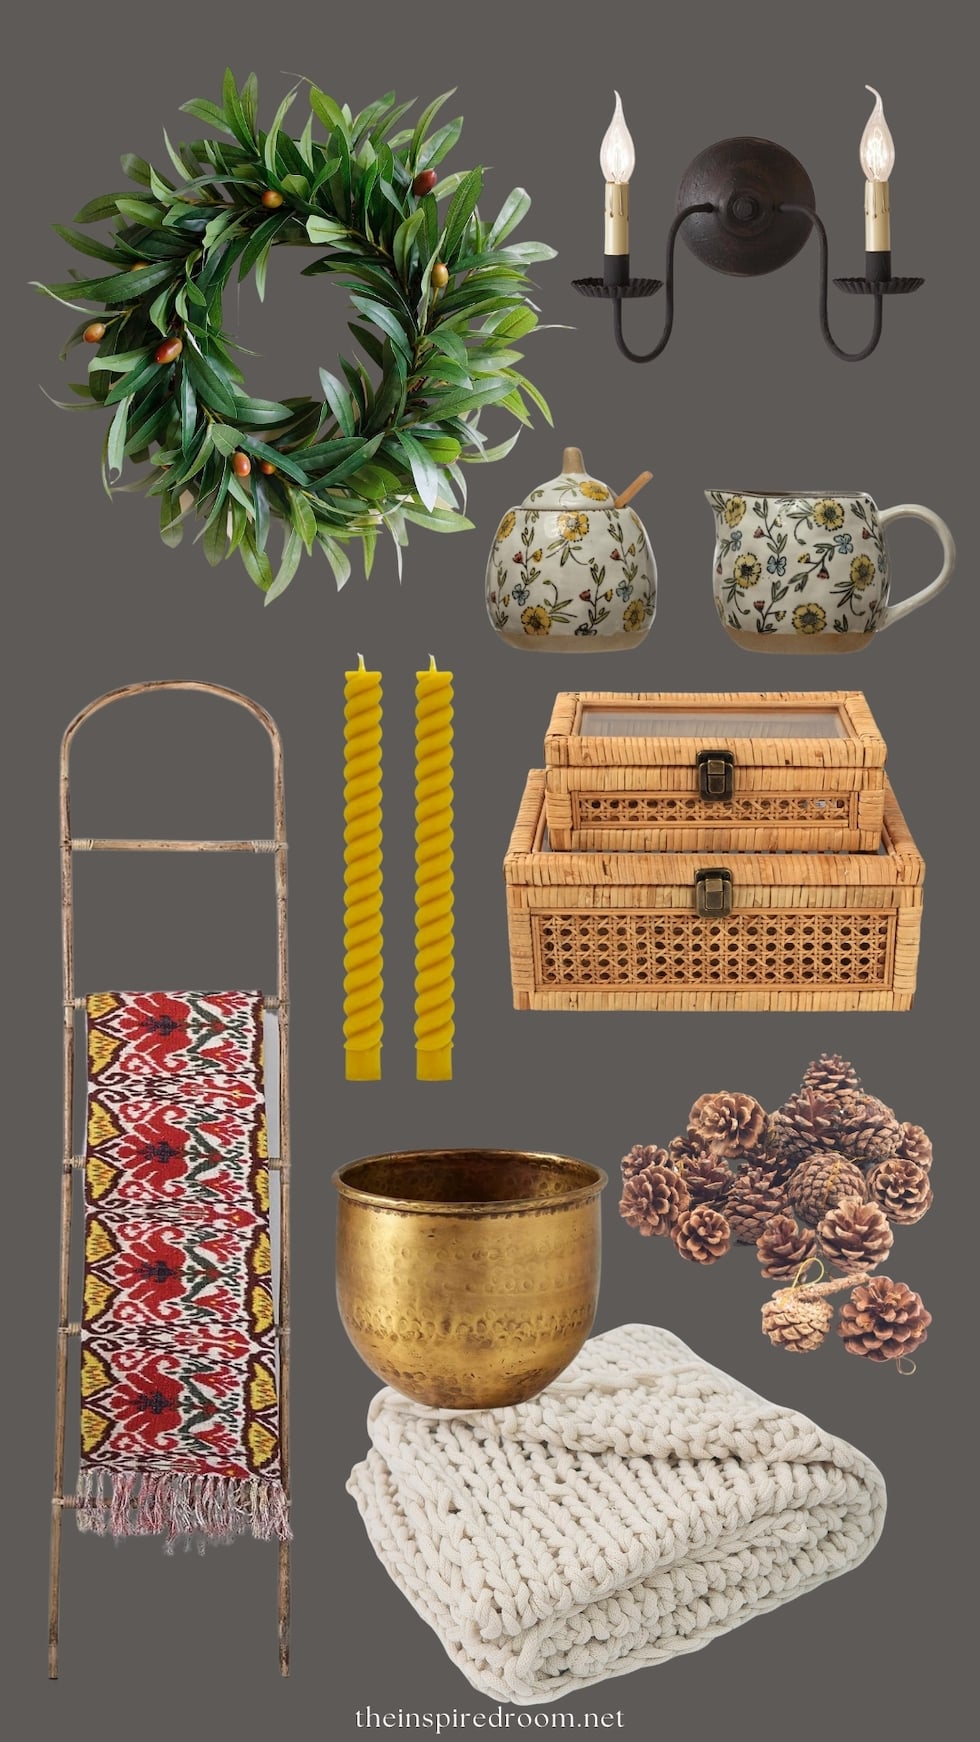 Latest Amazon Finds for the Home (Fall Decor and More in The Inspired Room Amazon Storefront!)